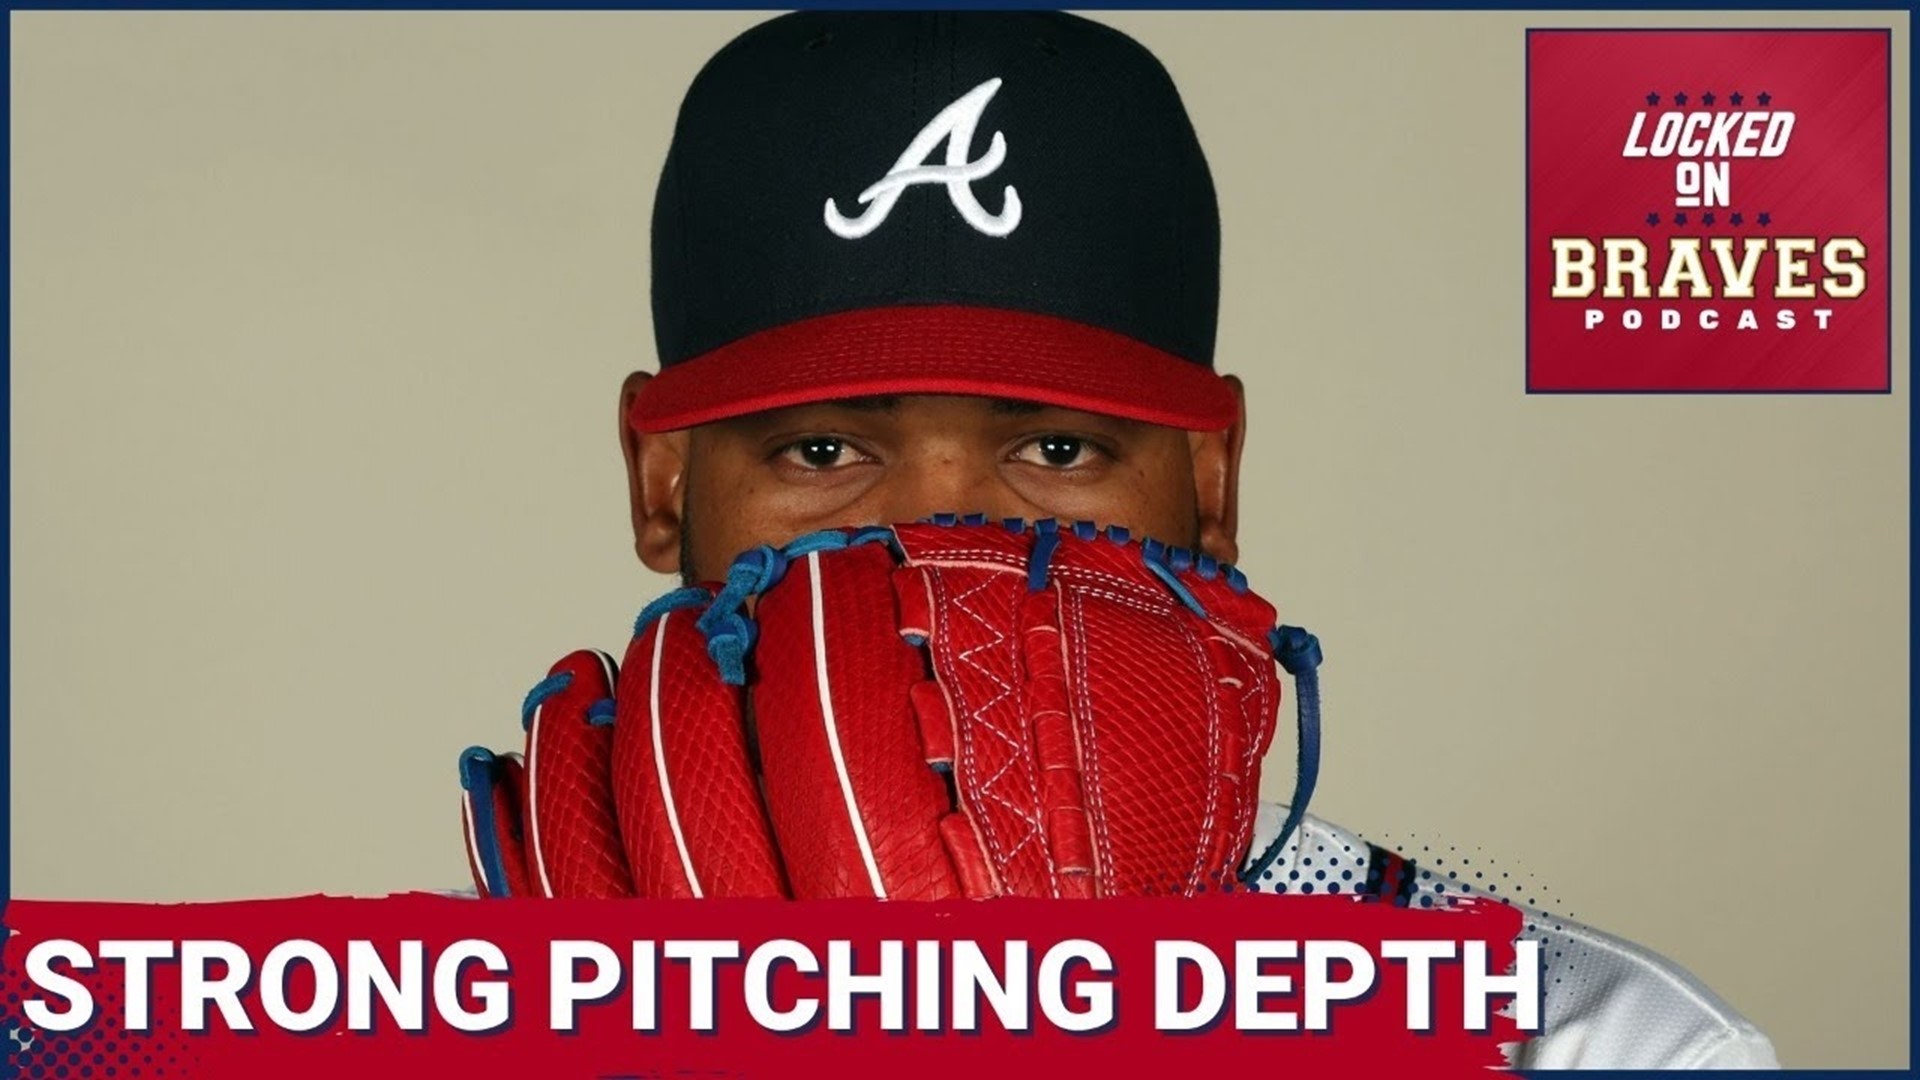 While the Atlanta Braves starting rotation carries significant injury risk, there is depth to help them get through the regular season.